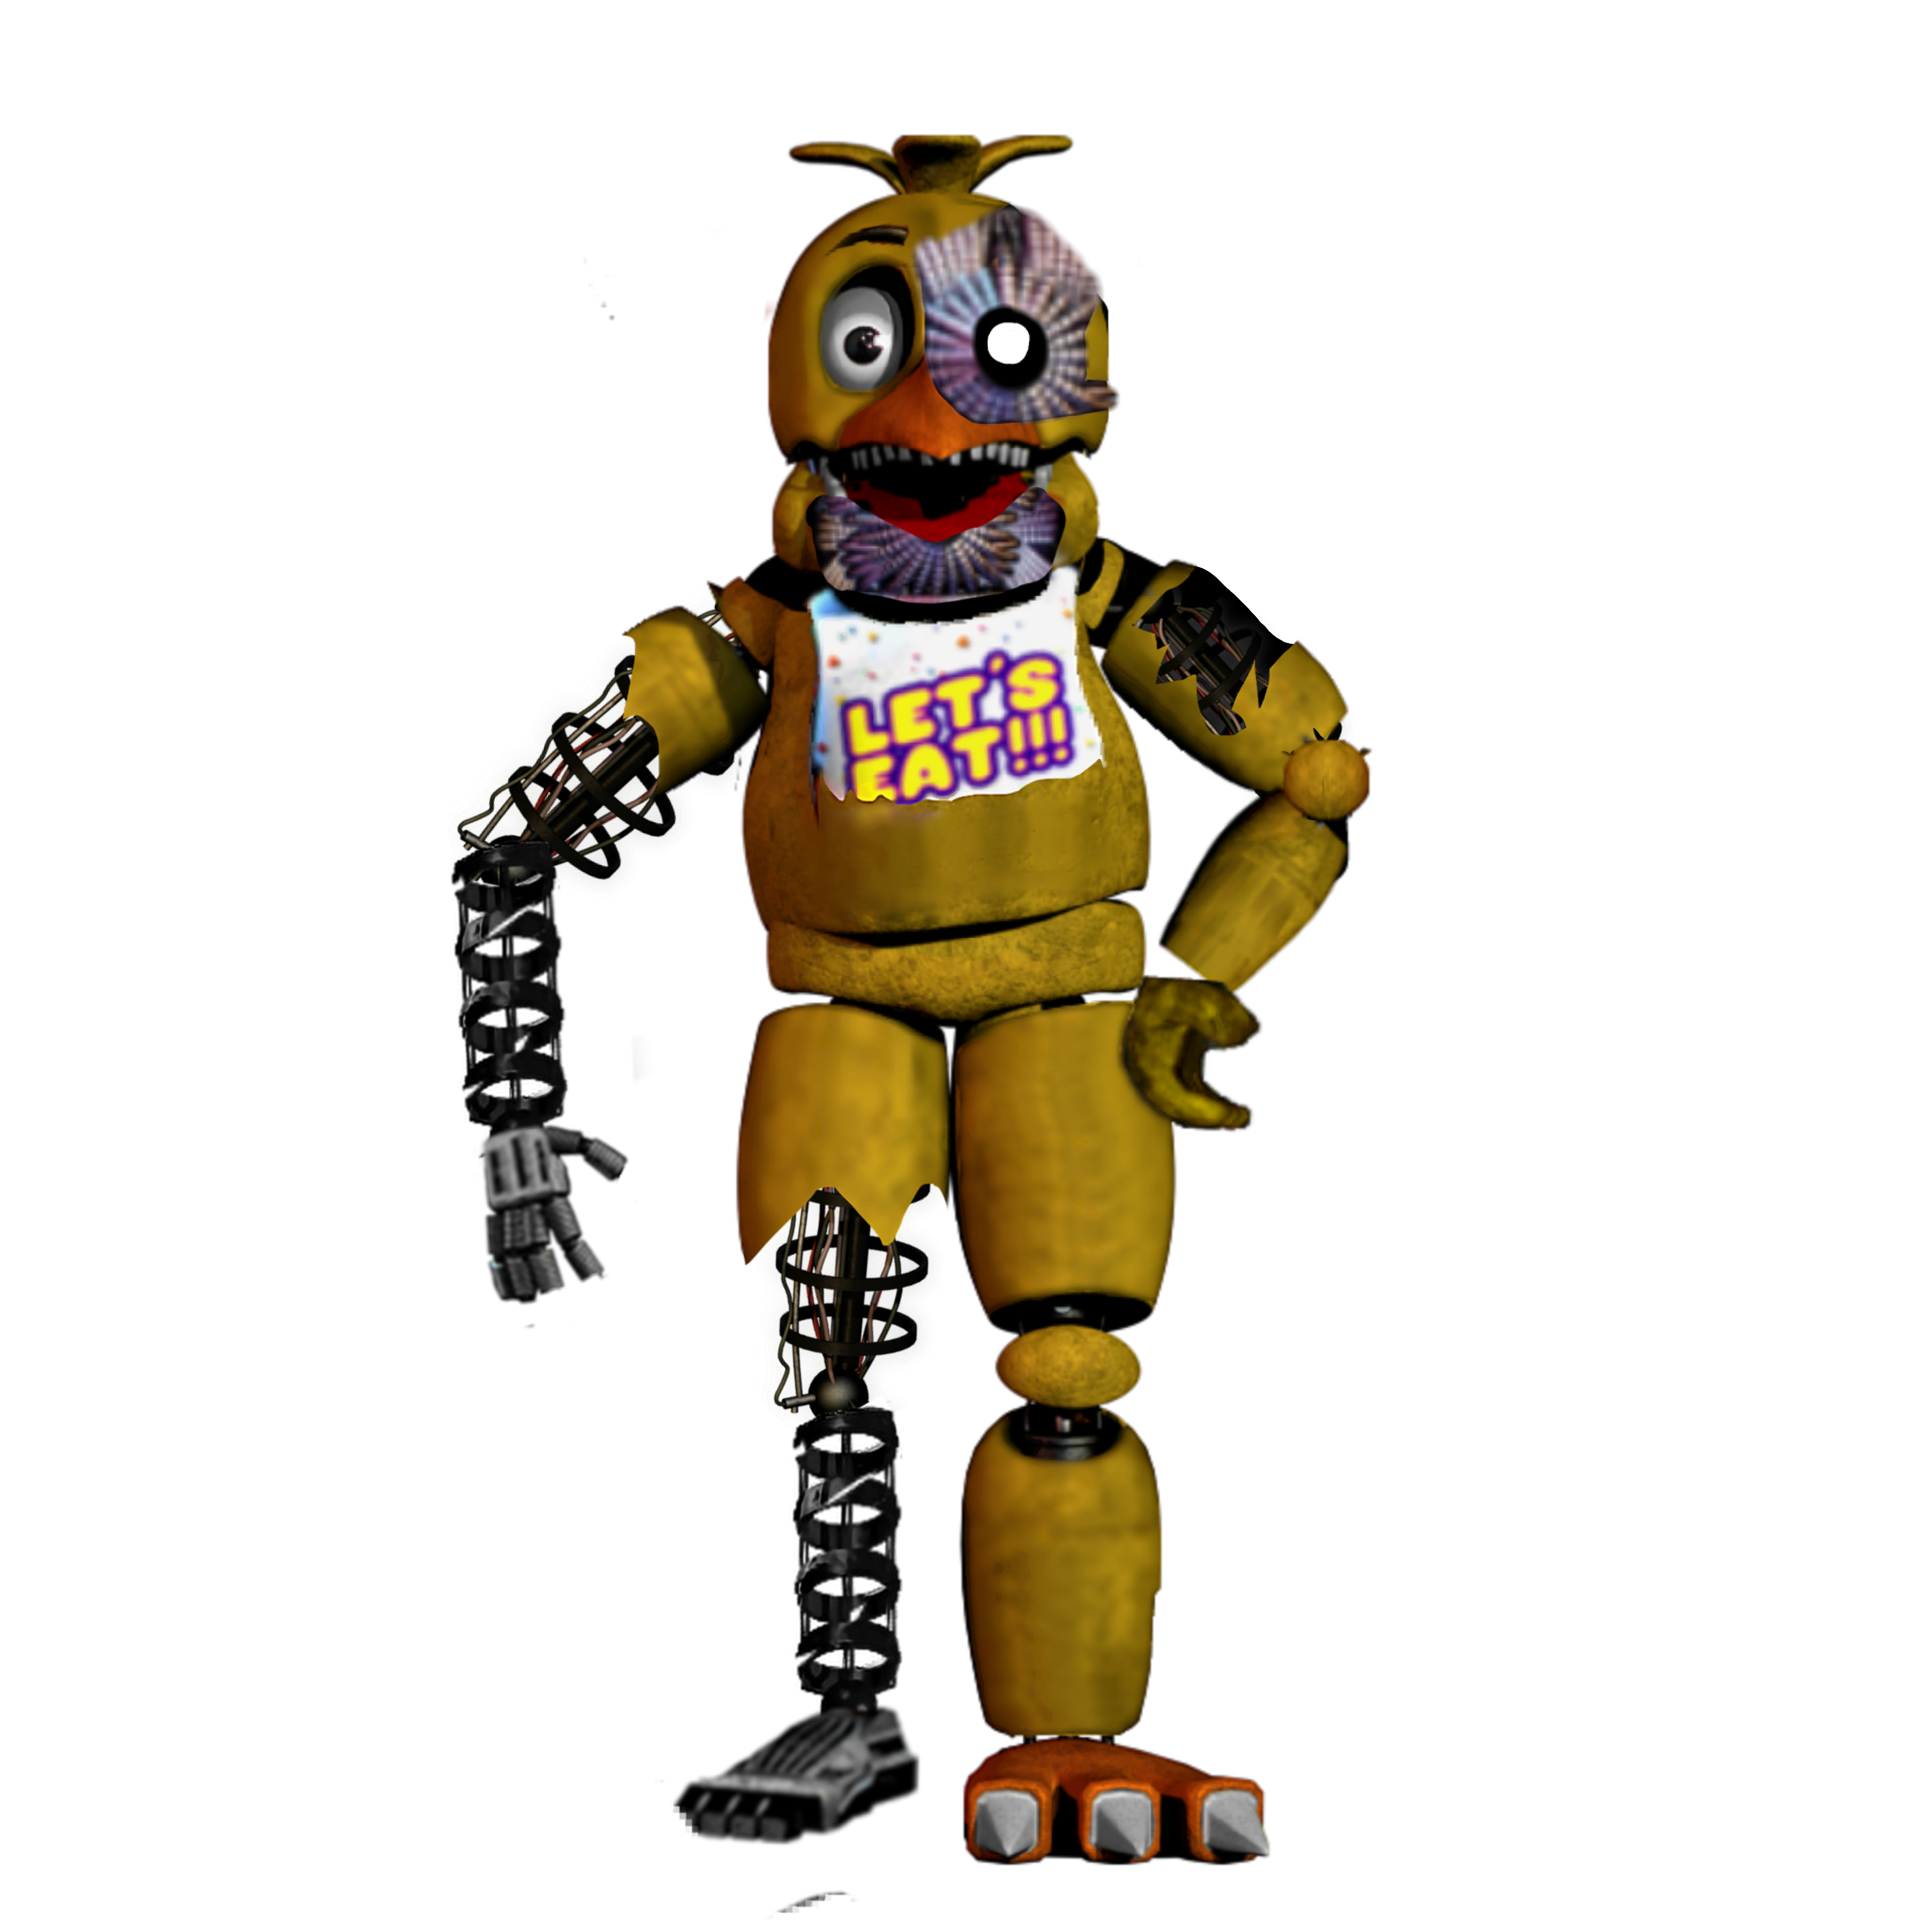 This visual is about fnaf freetoedit #fnaf stylized withered chica.